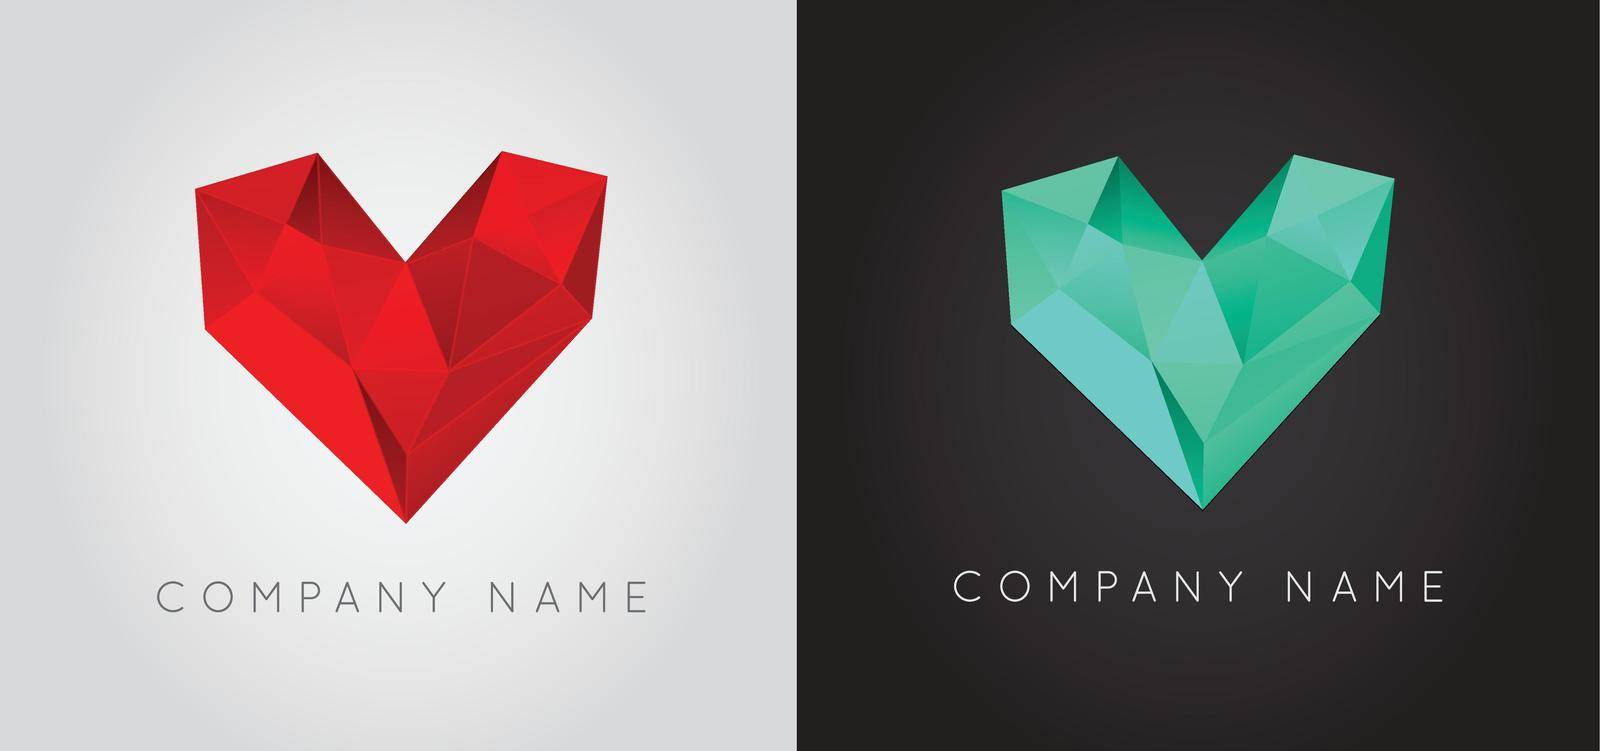 Trendy Crystal Triangulated Gem Logo Element Perfect for Business Geometric Low Polygon Style Visual Identity Vector Set Collection